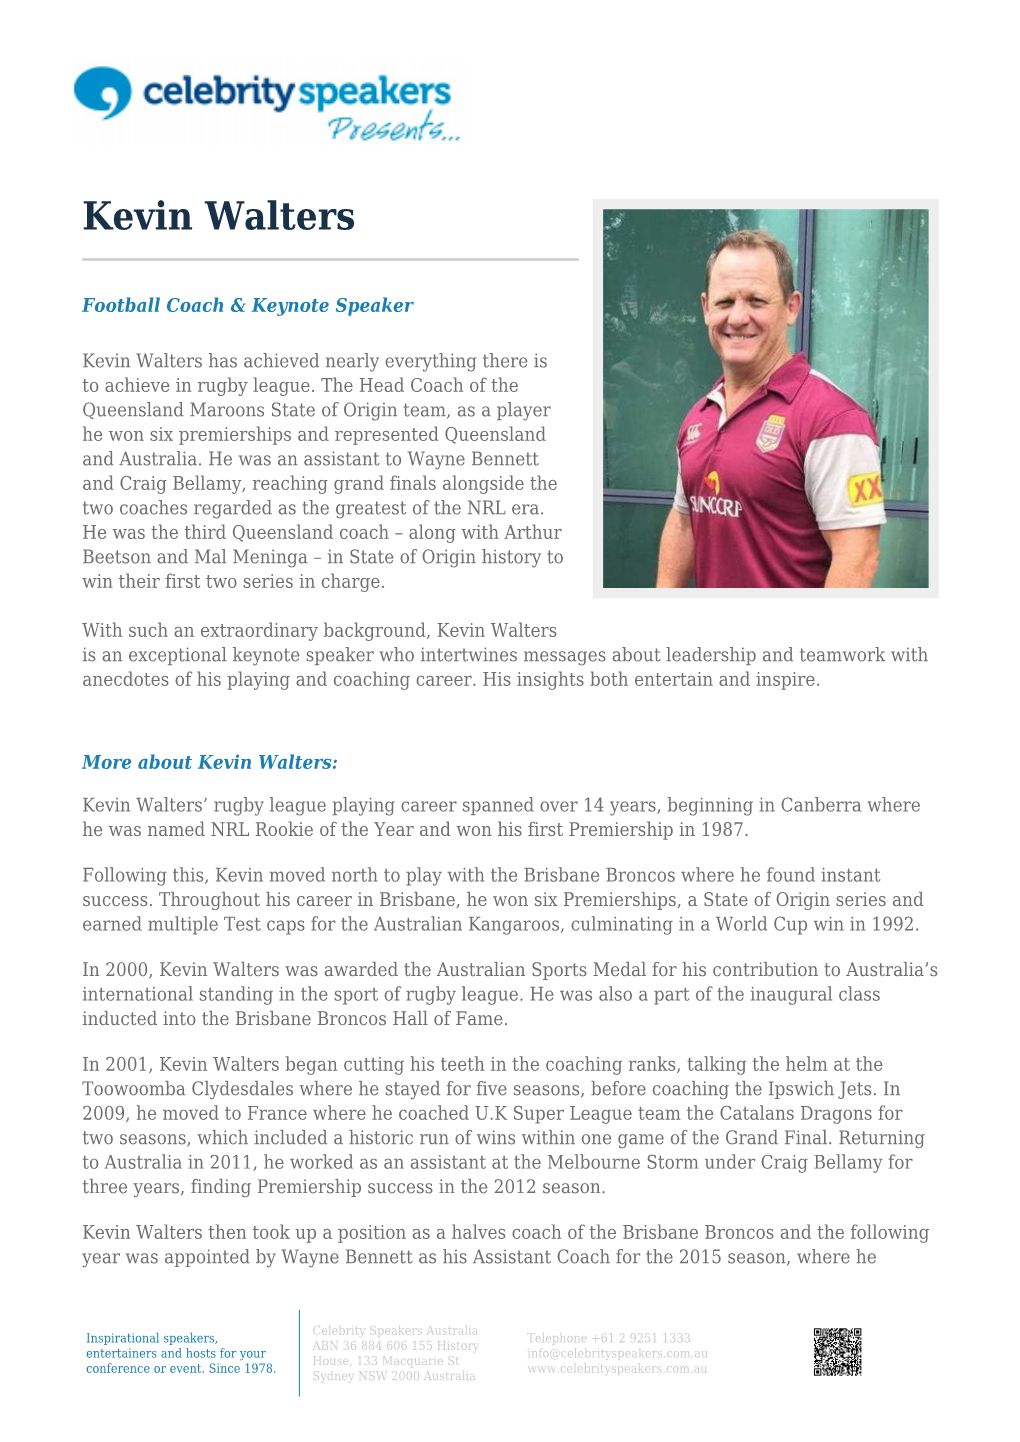 Kevin Walters